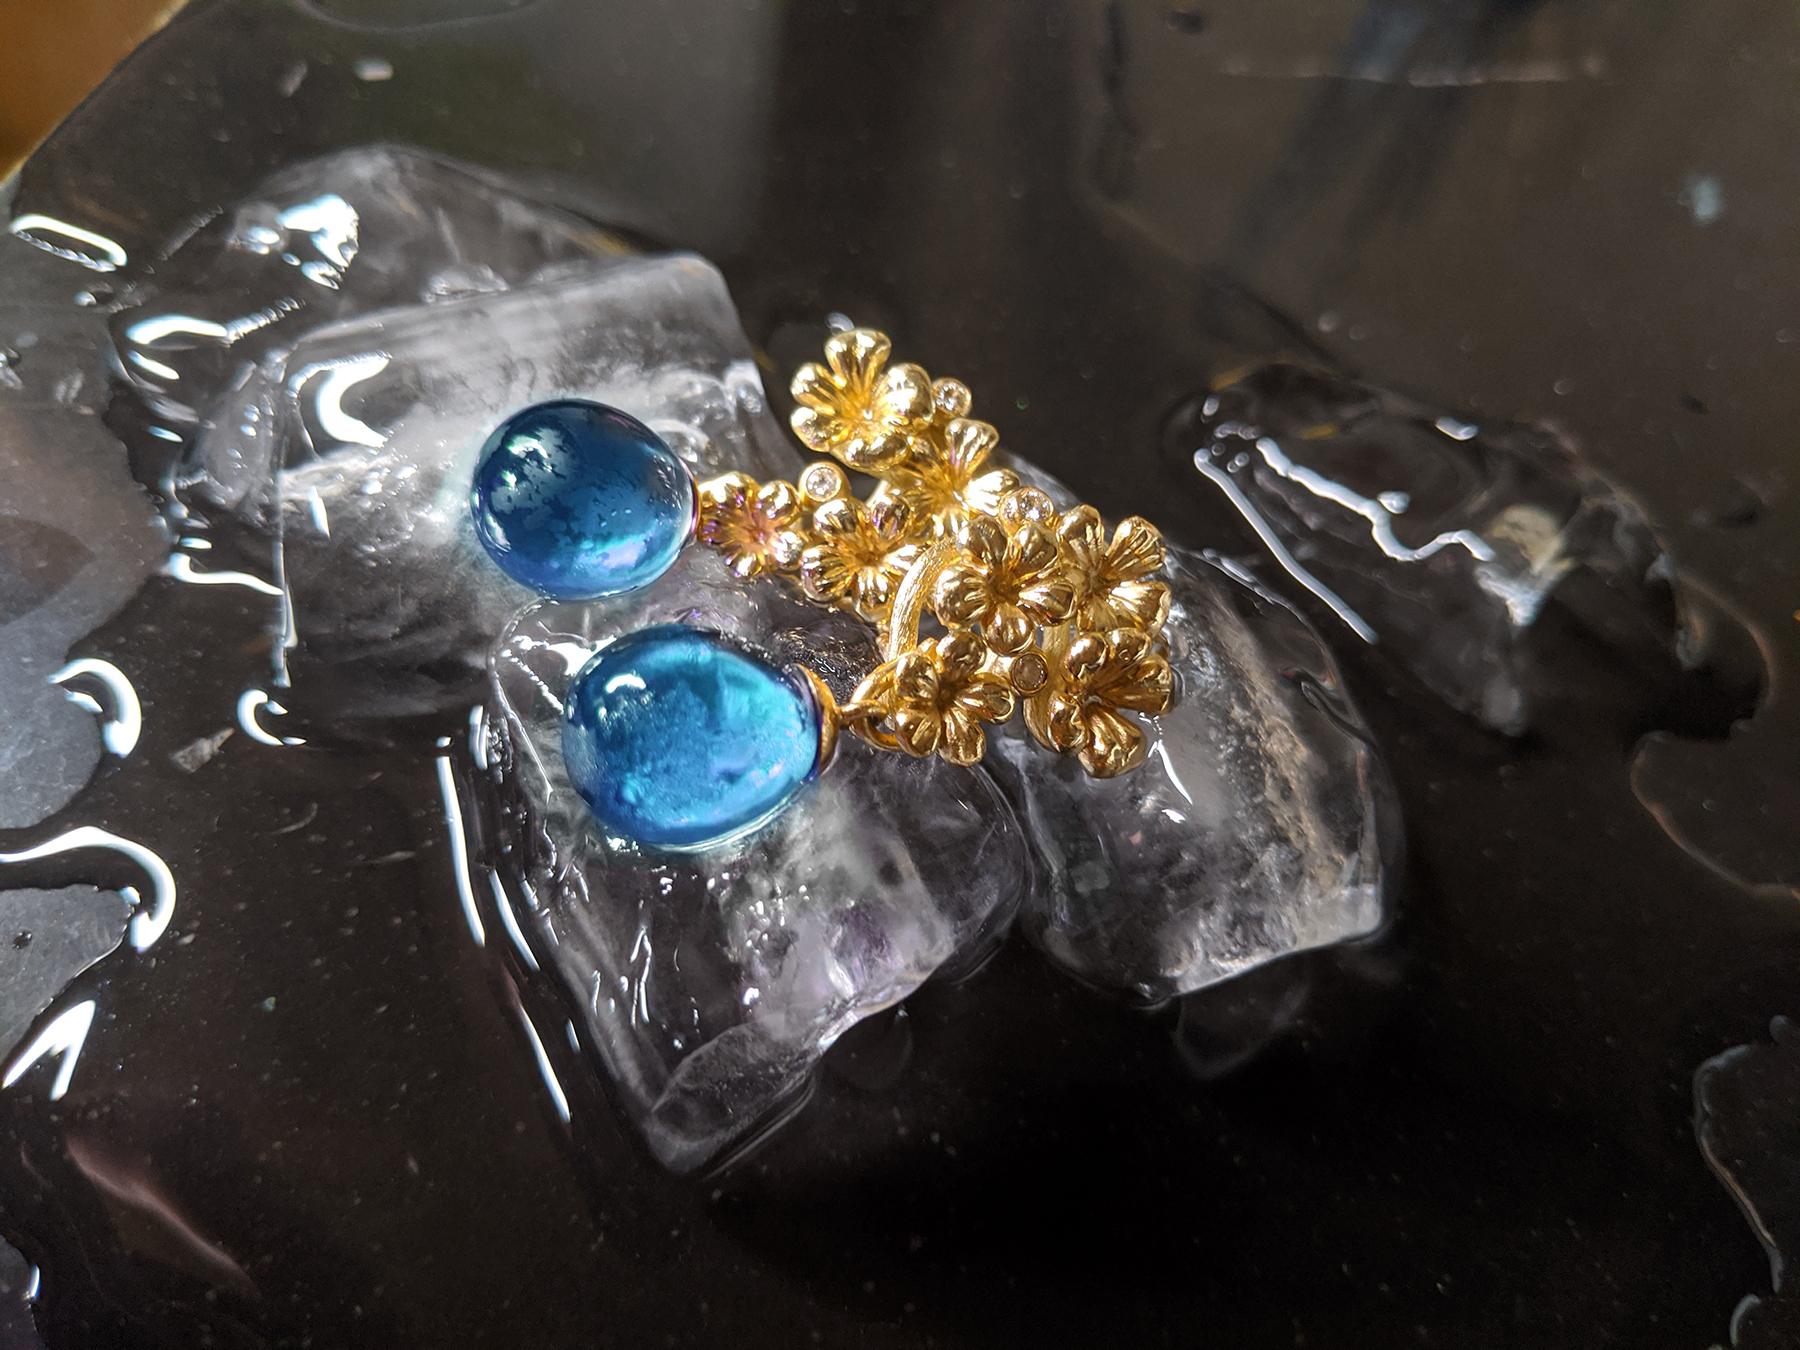 The Plum Flowers contemporary jewelry collection was featured in Vogue UA review and designed by oil painter from Berlin, Polya Medvedeva.

These clip-on earrings are made of 18 karat yellow gold and encrusted with 6 round diamonds and cabochon blue